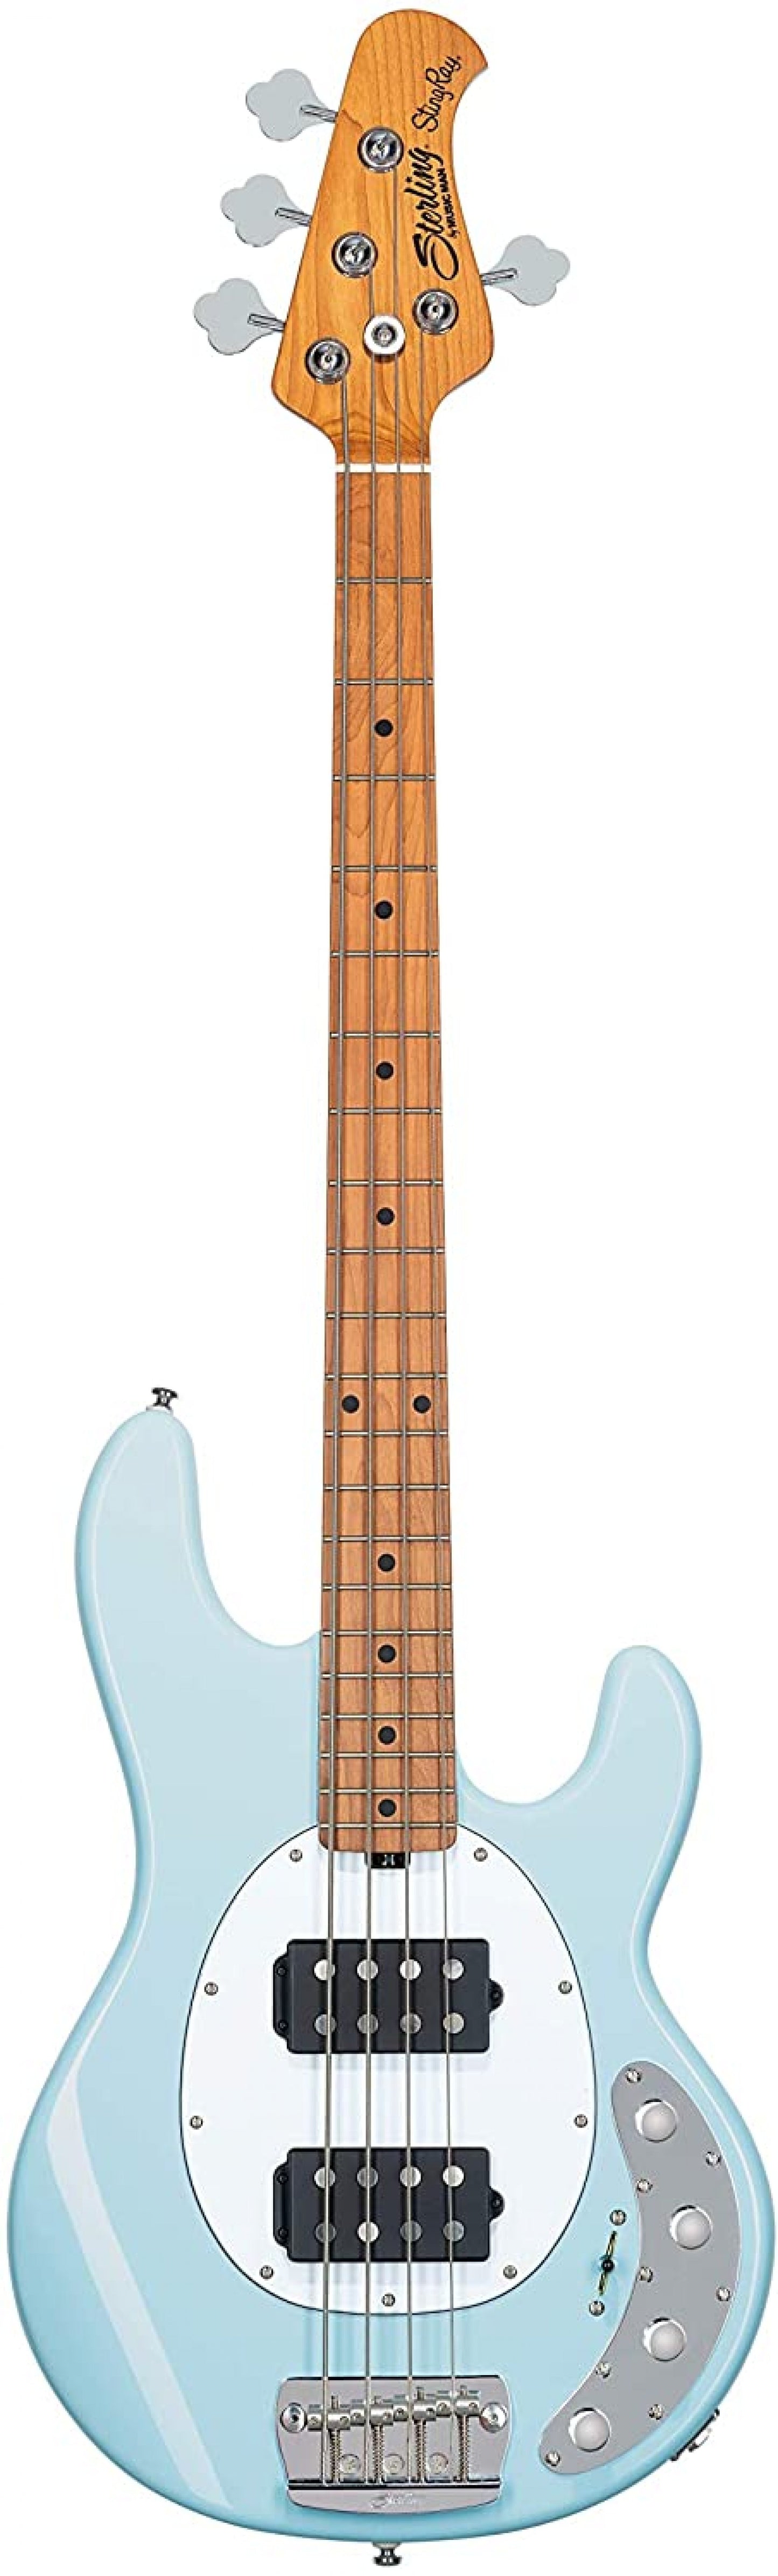 Sterling by Music Man 4 String Bass Guitar, Right, Daphne Blue (RAY34HH-DBL-M2)